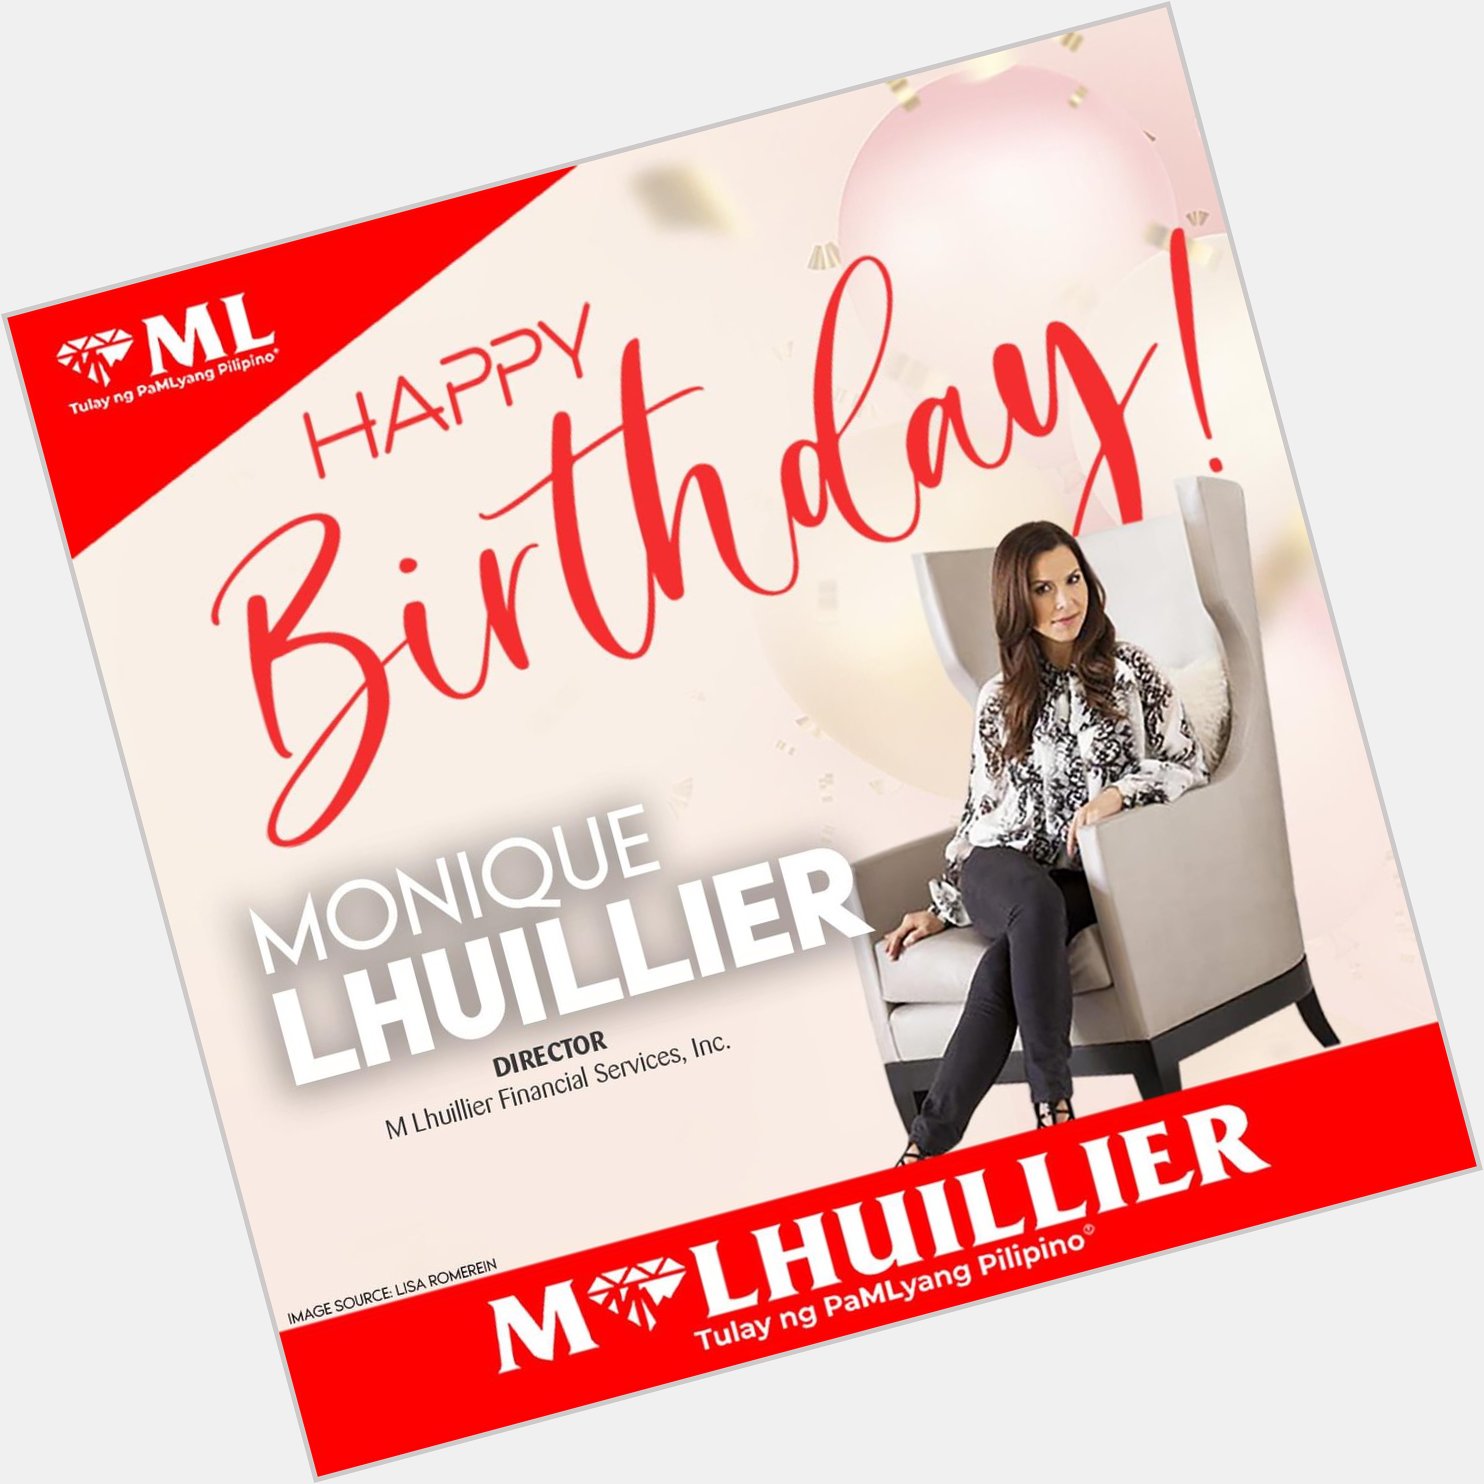 Happy birthday to our Director, Ms. Monique Lhuillier! 